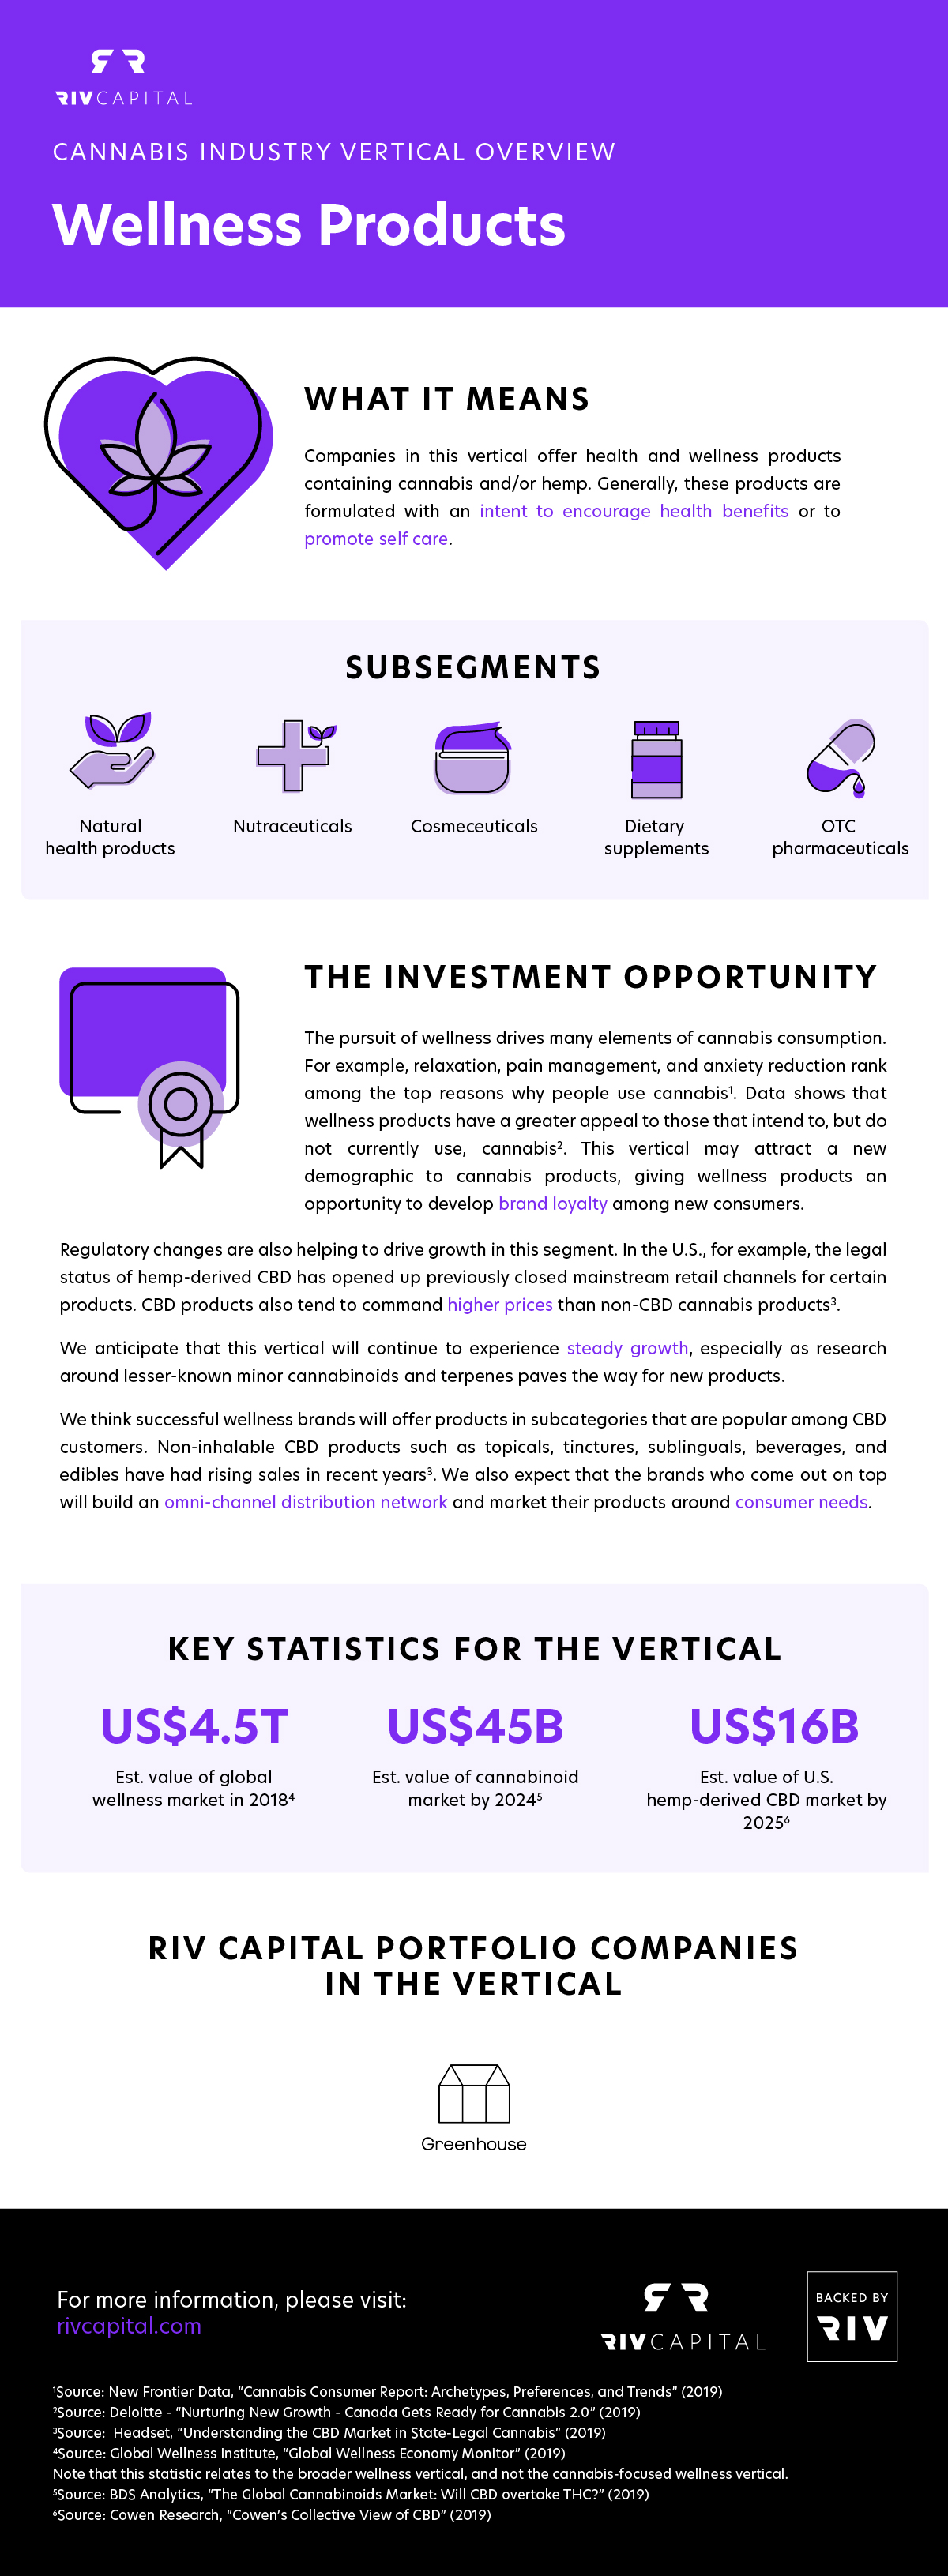 Wellness products: statistics, subsegments and the investment opportunity for the cannabis industry (infographic)